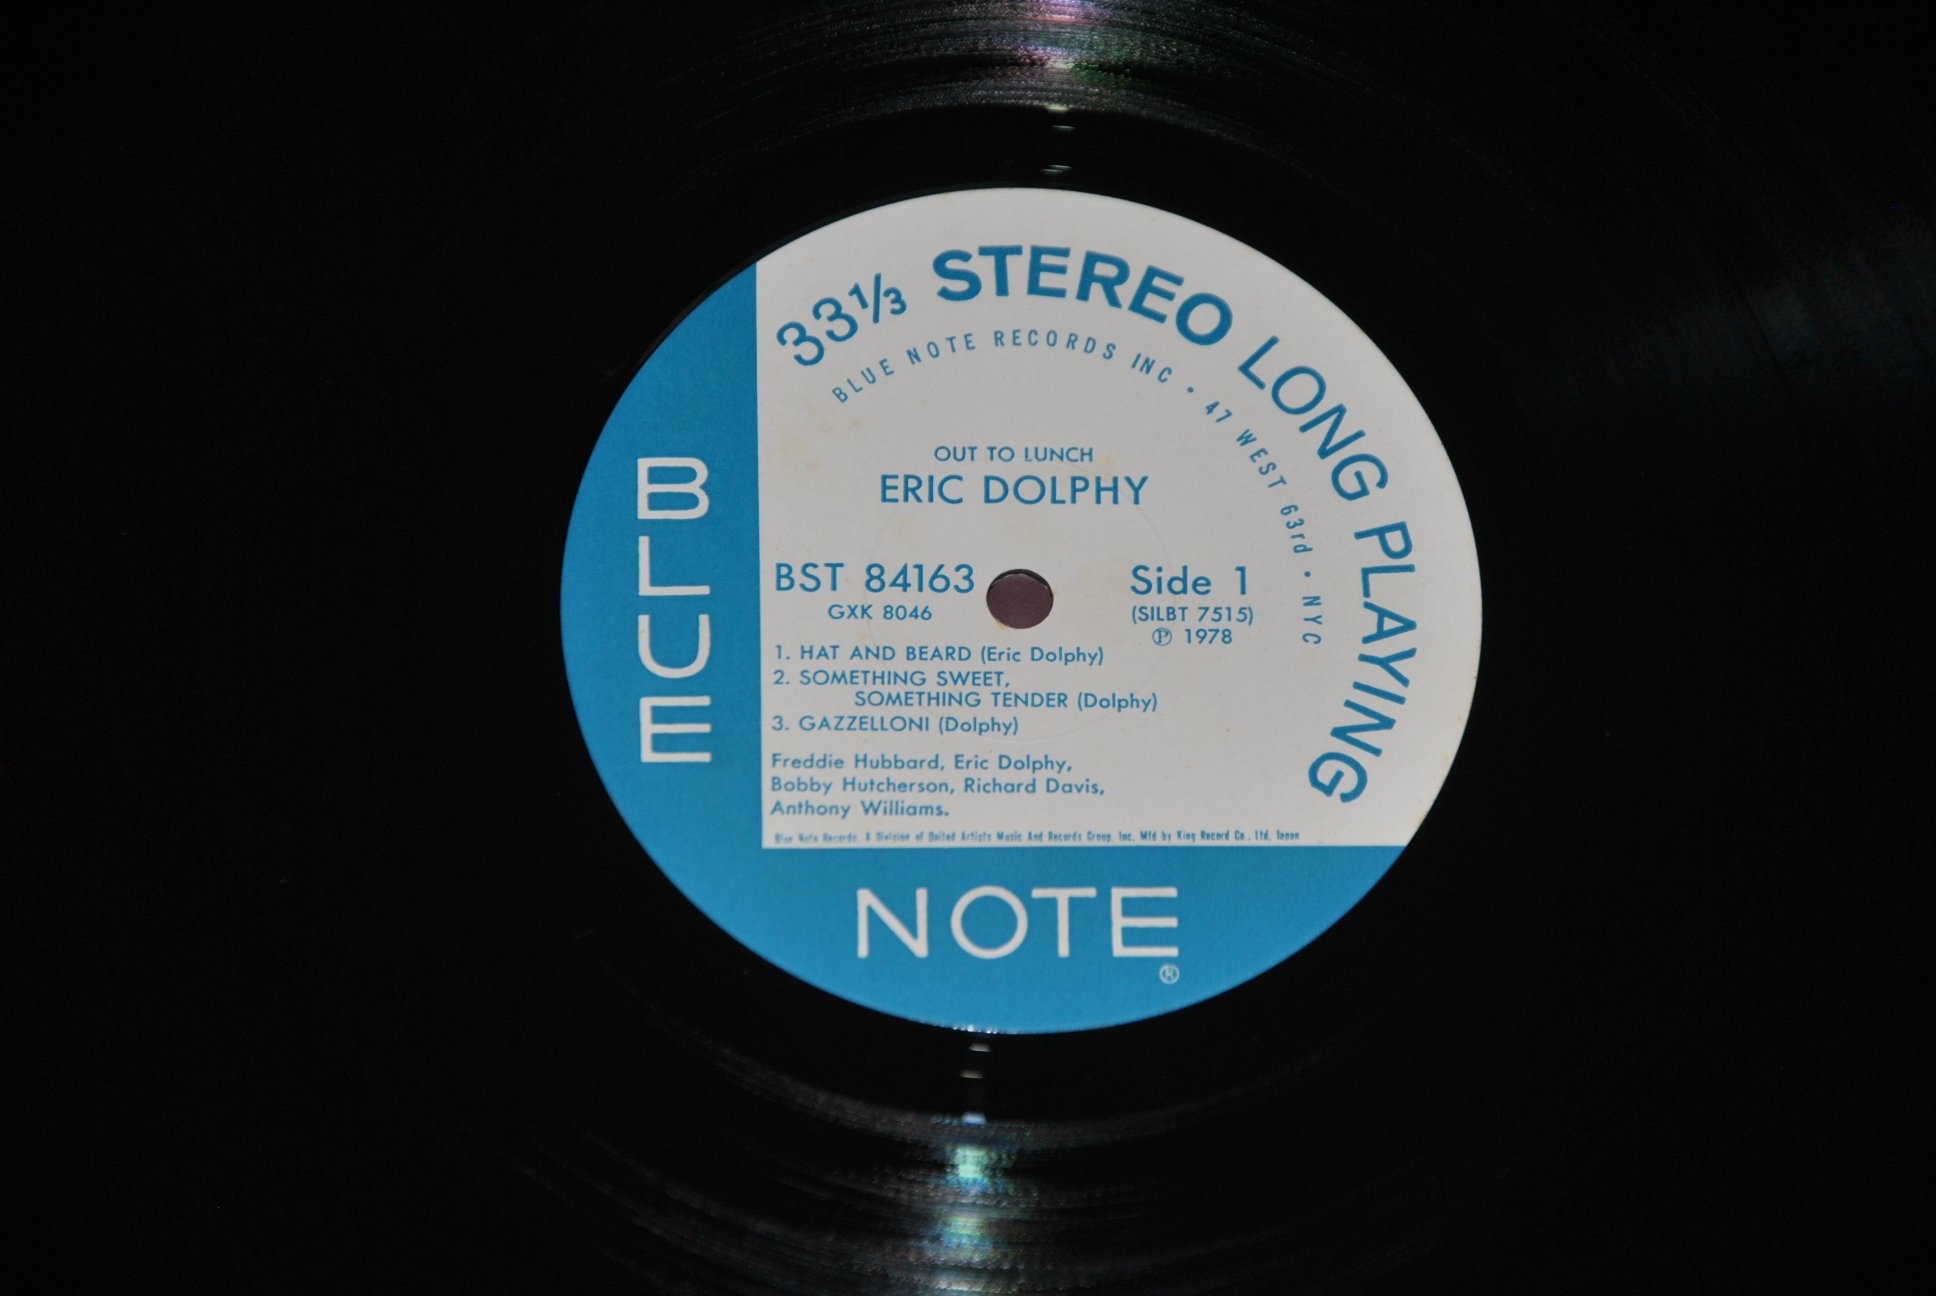 ERIC DOLPHY – OUT TO LUNCH – BLUE NOTE GXK 8046 1978 – LP JAPAN OBI NM

LP EDIZI…